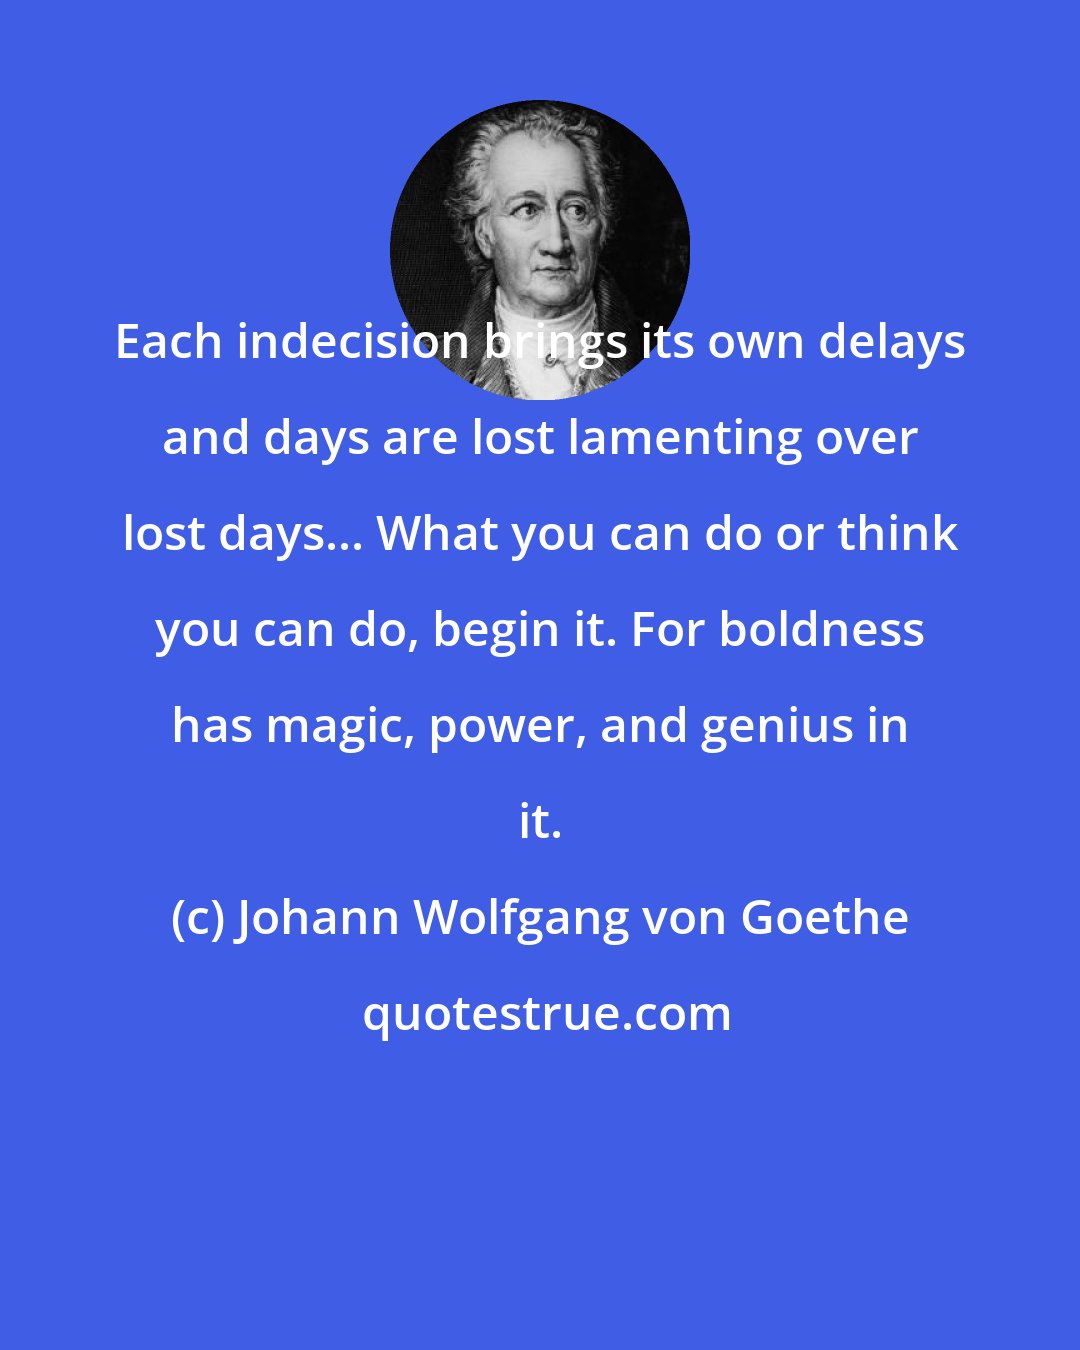 Johann Wolfgang von Goethe: Each indecision brings its own delays and days are lost lamenting over lost days... What you can do or think you can do, begin it. For boldness has magic, power, and genius in it.